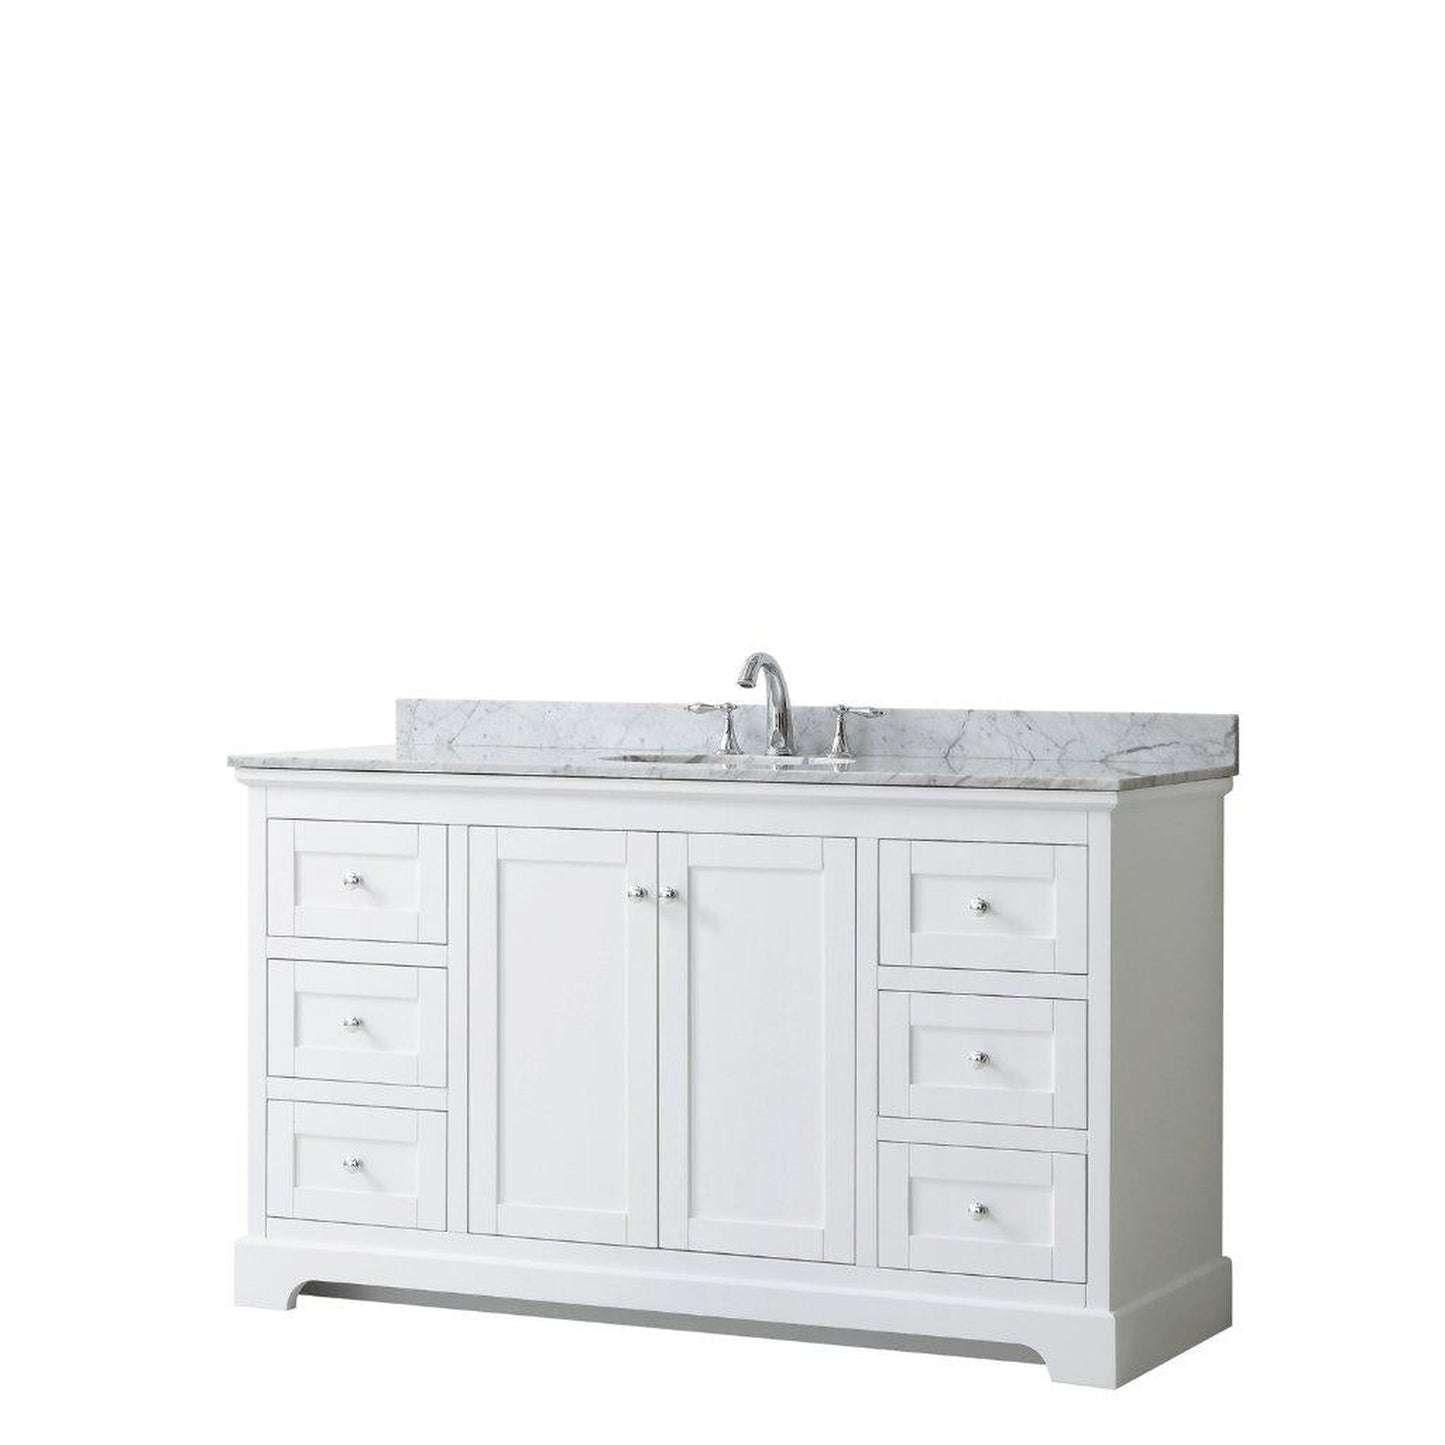 Wyndham Collection Avery 60" White Single Bathroom Vanity, White Carrara Marble Countertop With 3-Hole Faucet, 8" Oval Sink, Polished Chrome Trims